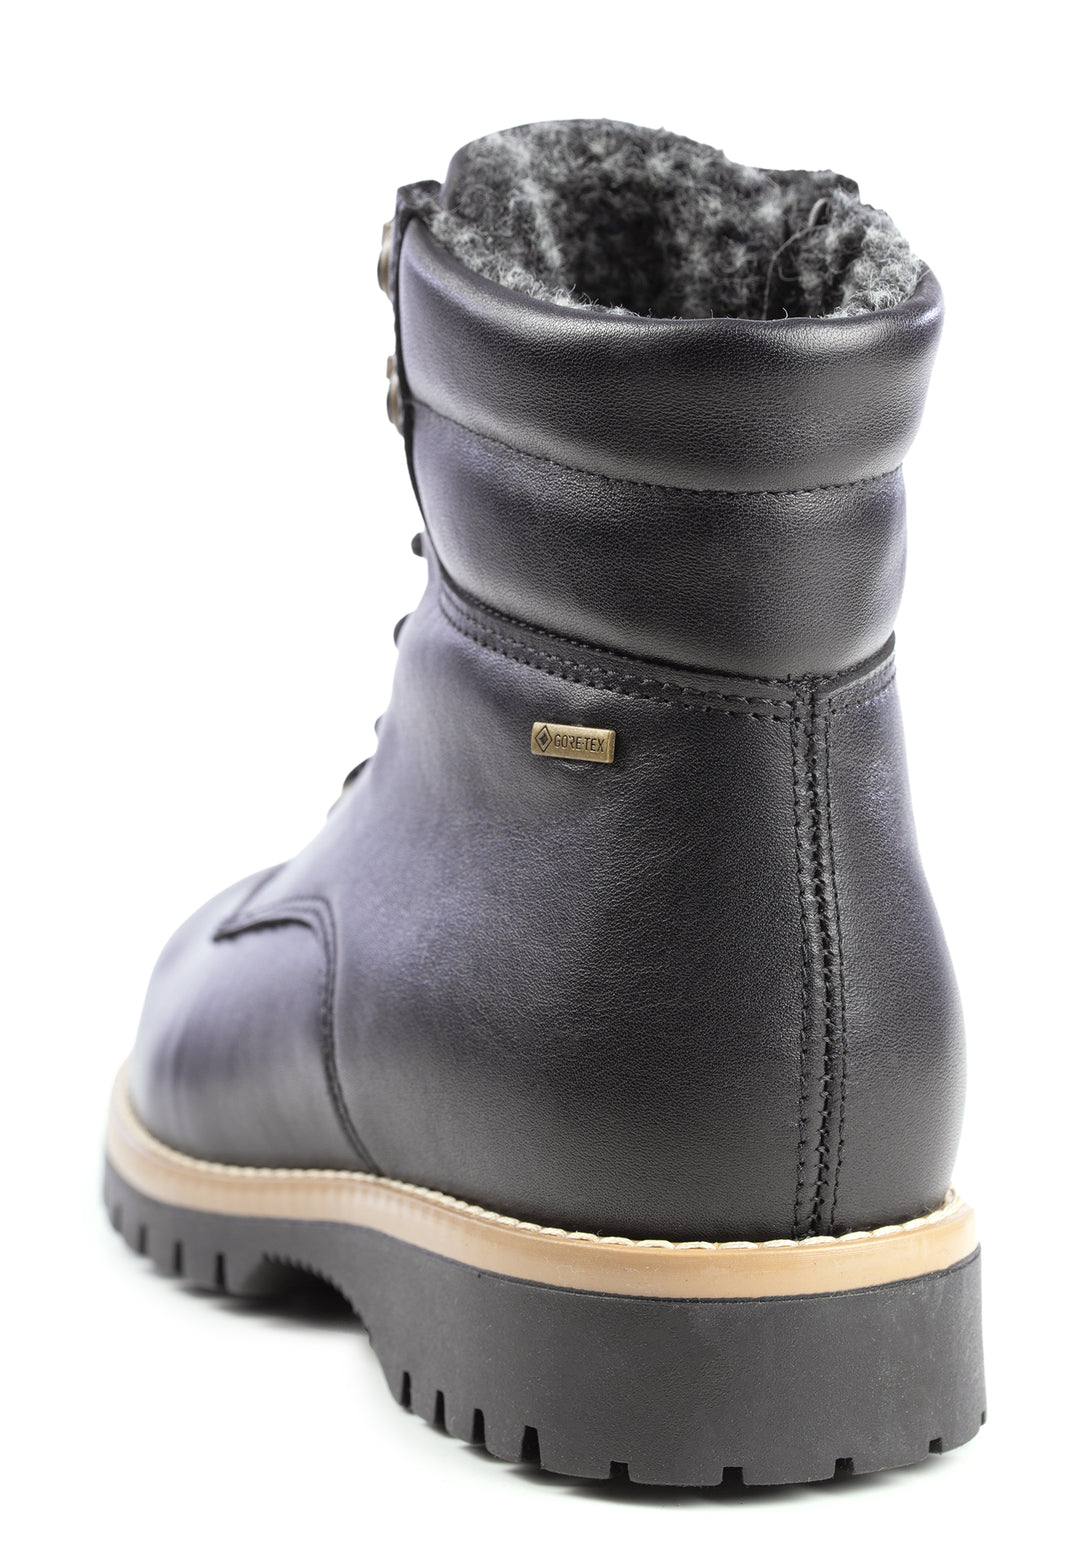 RAE Women’s GORE-TEX® ankle boot